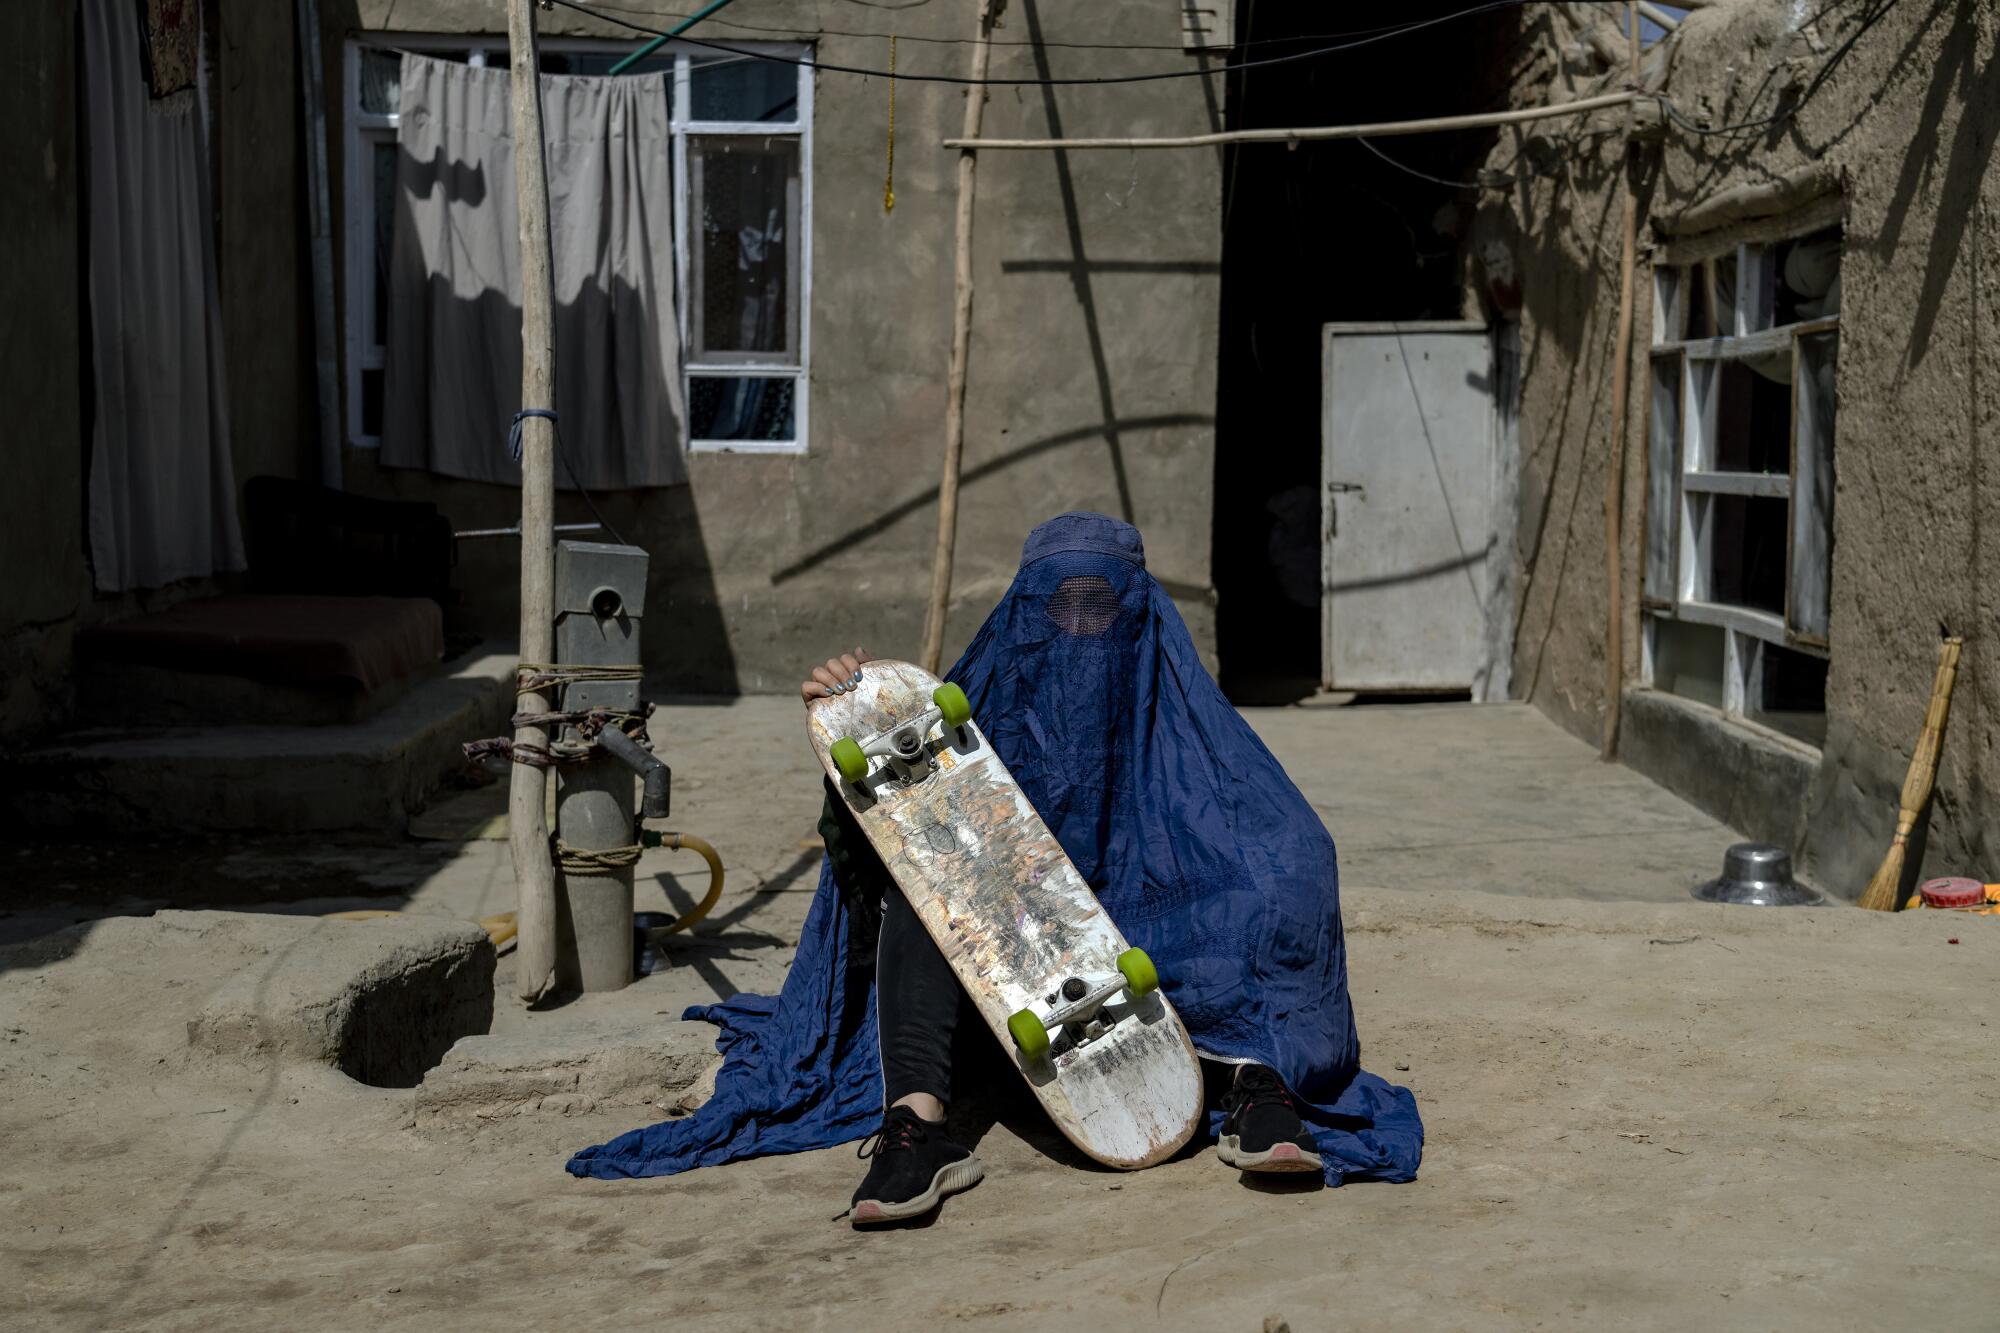 An Afghan girl in a burqa poses with her skateboard.